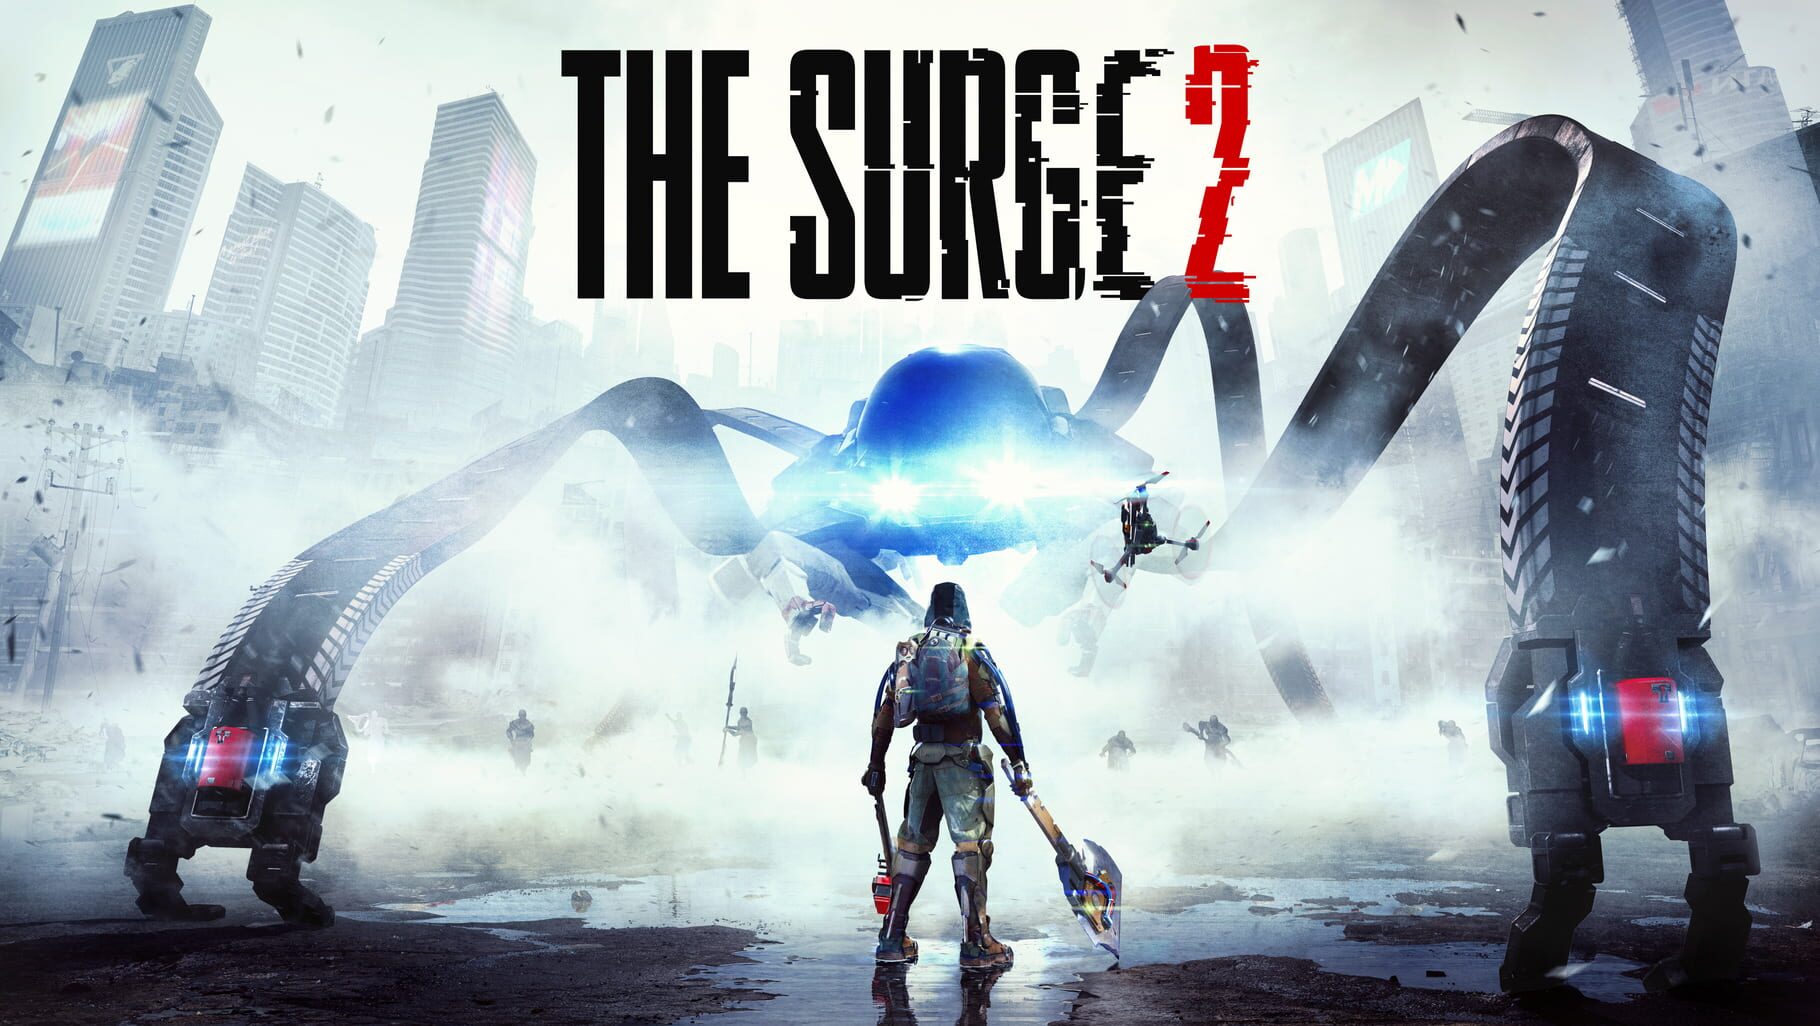 Artwork for The Surge 2